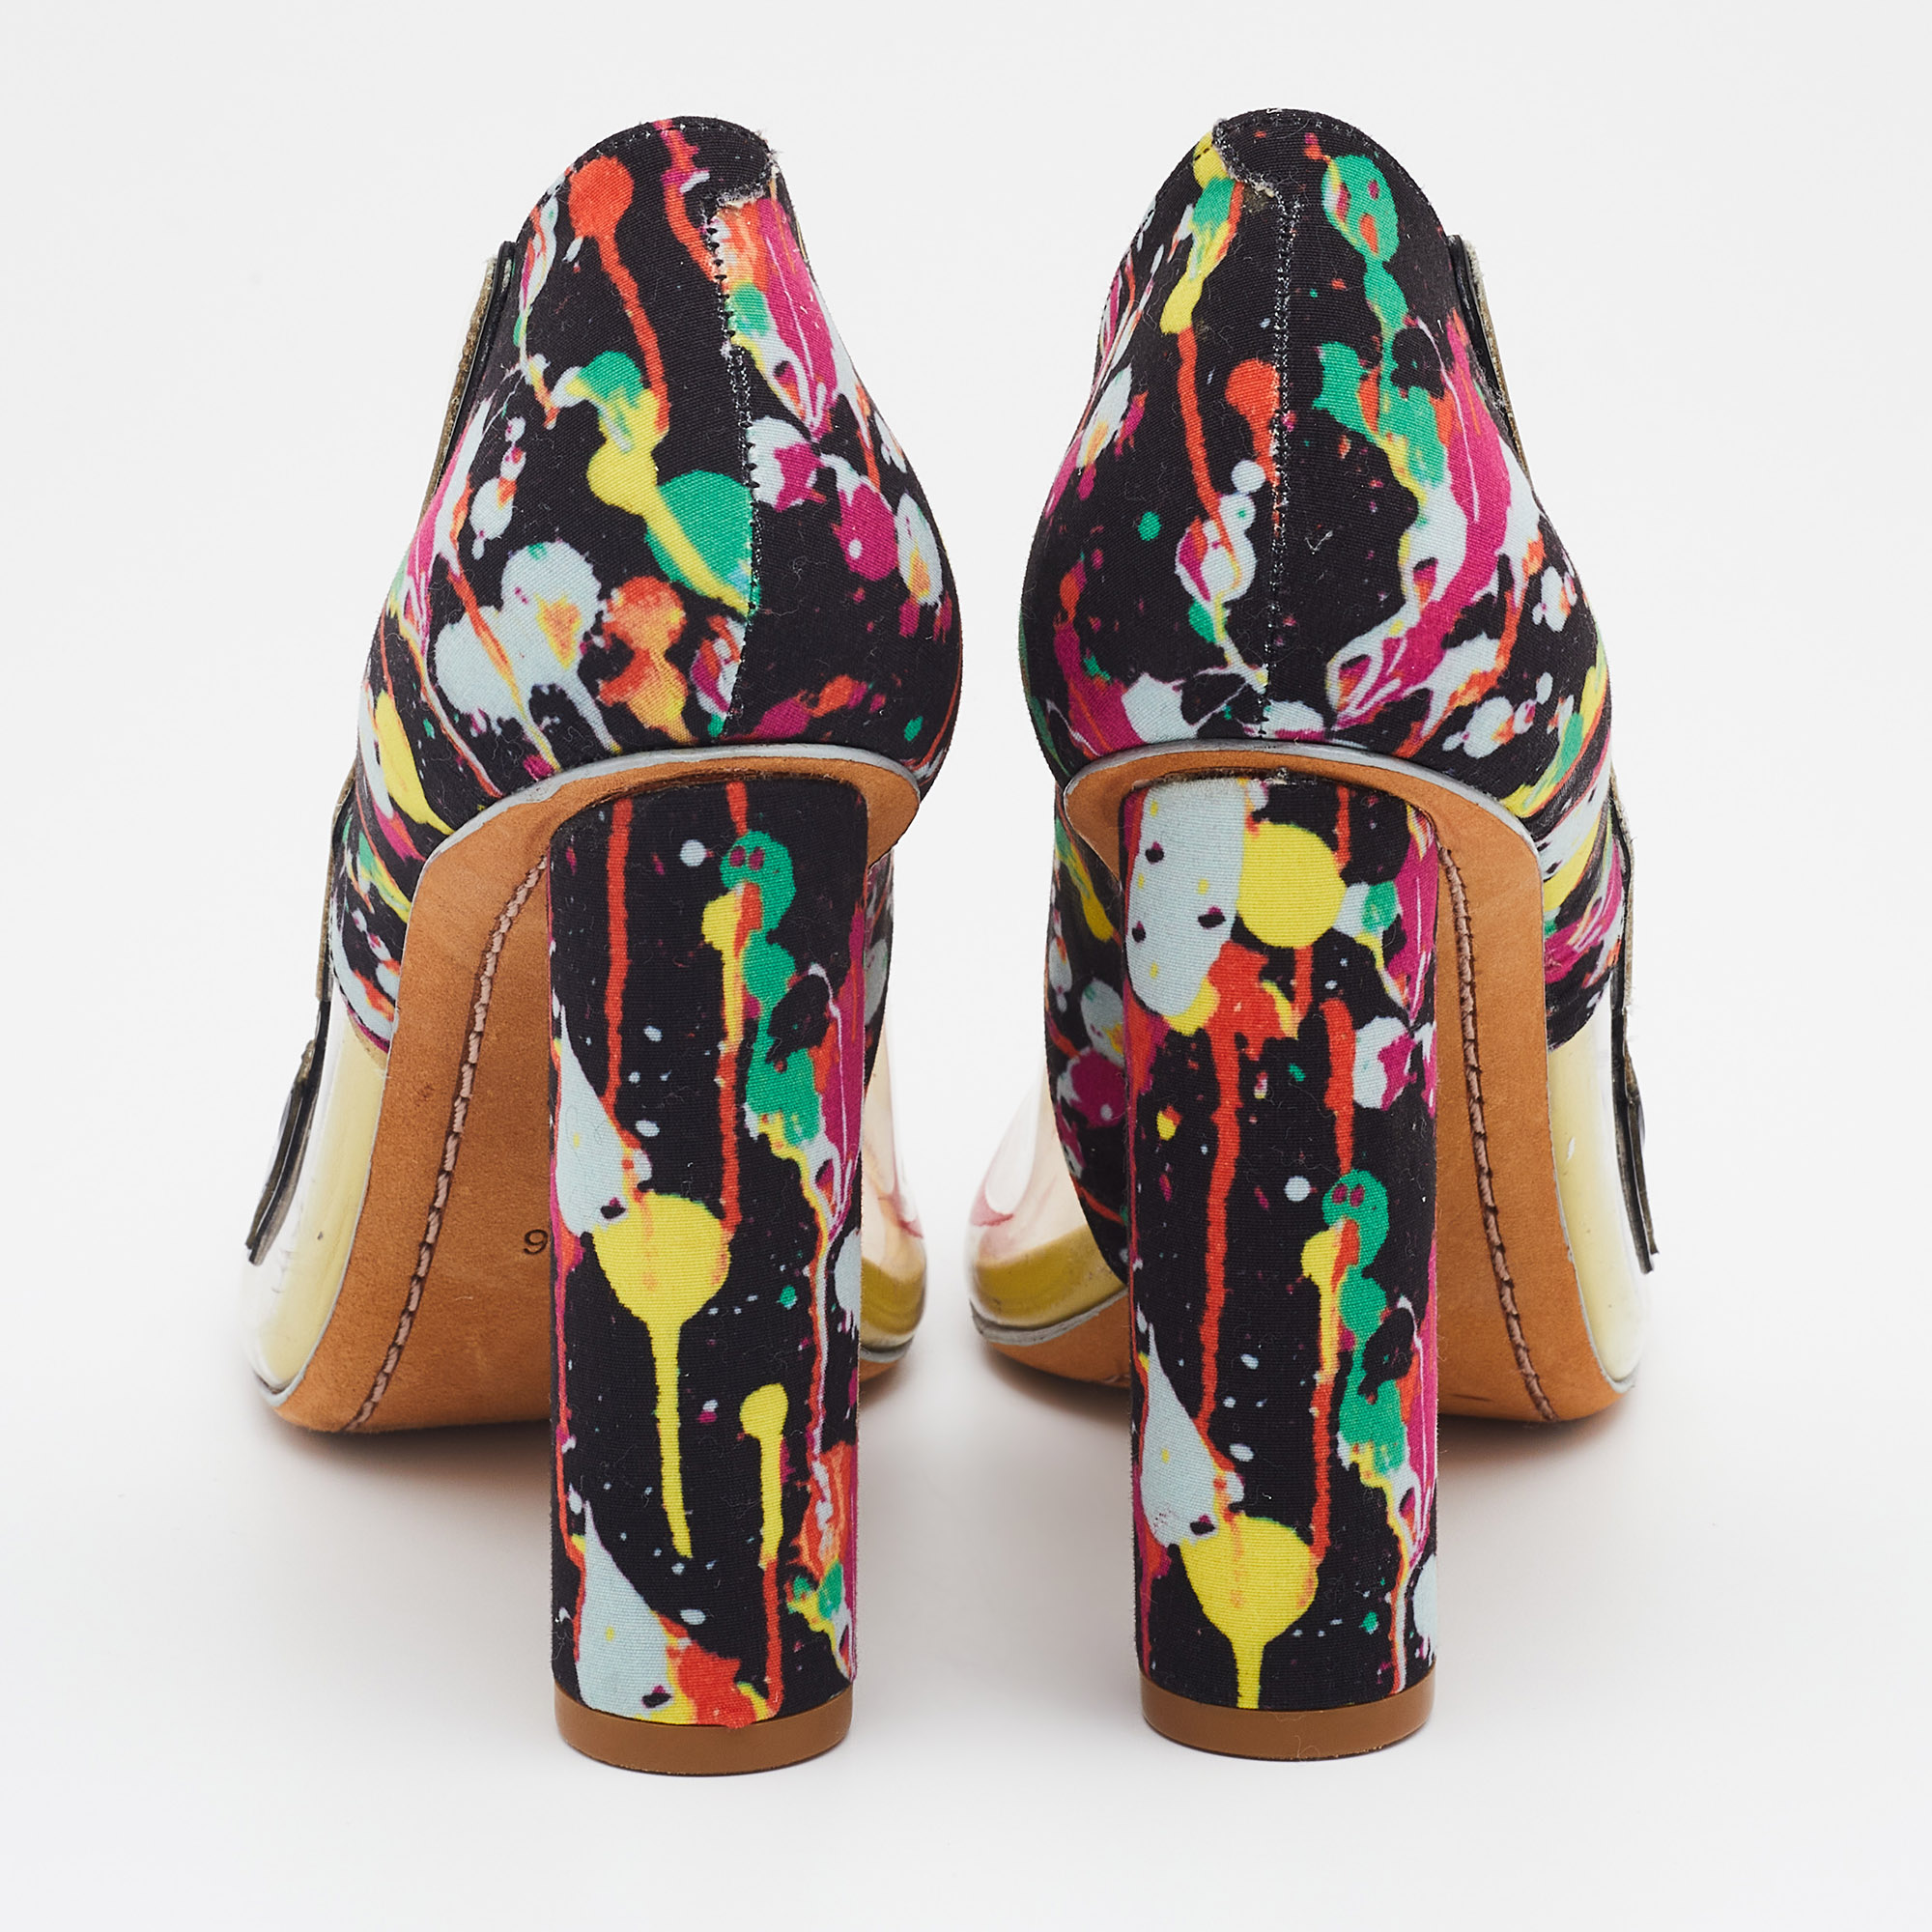 Sophia Webster Multicolor PVC And Fabric Party Like Pollock Peep Toe Pumps Size 36